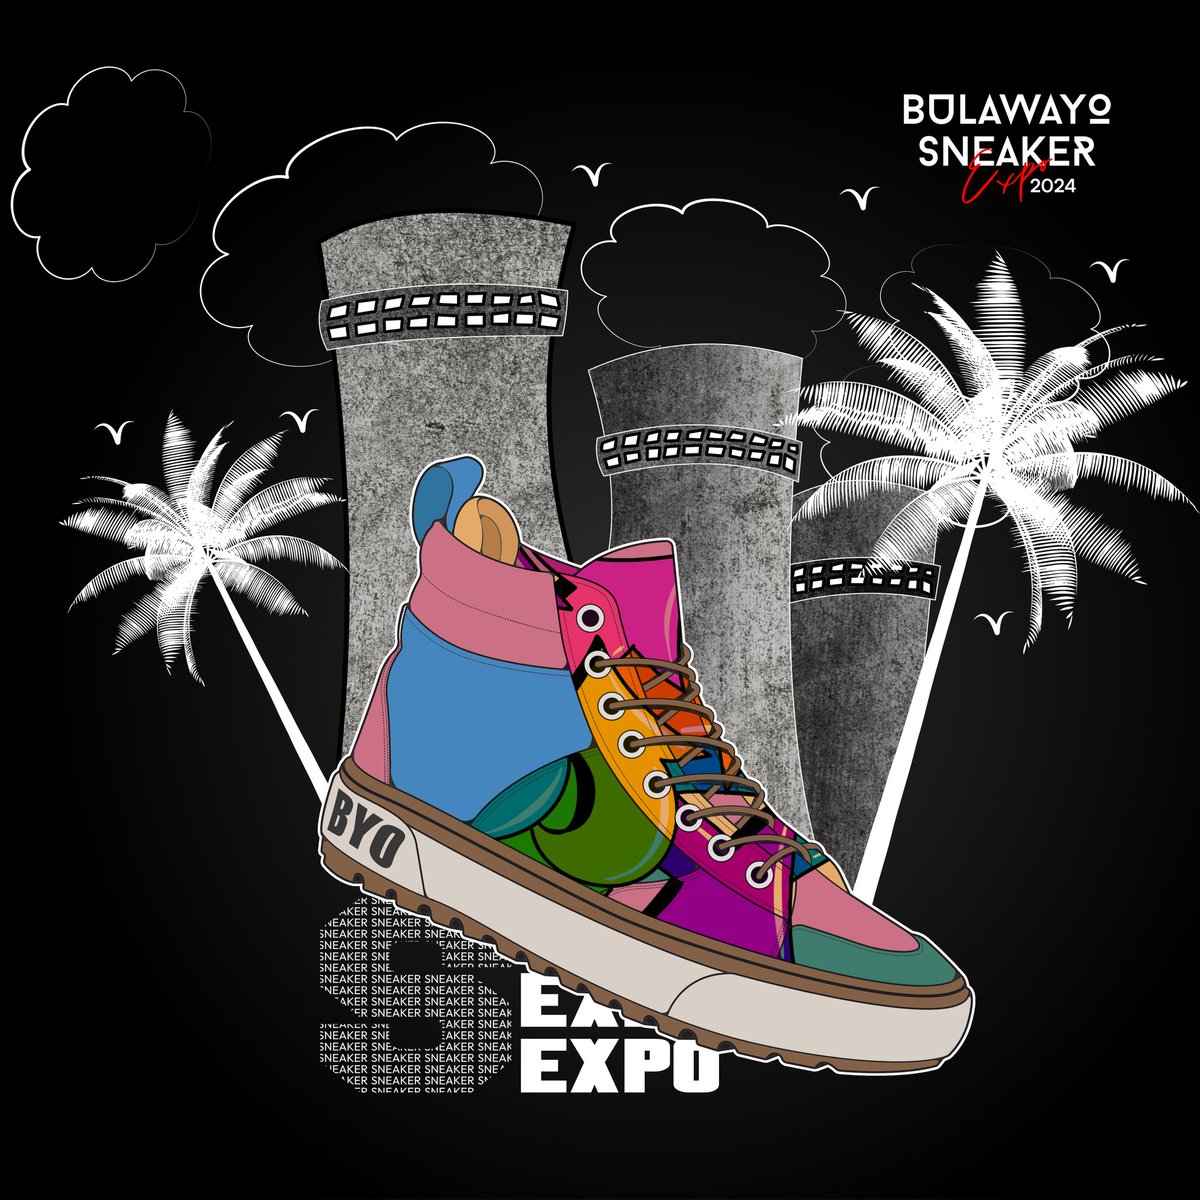 Wassup guys, here's my thought of this year's BULAWAYO SNEAKER EXPO 2024. Hope y'all love it. ; ). #byosneakerexpo2024 #ByoSneakerExpo #byosneakerexpo